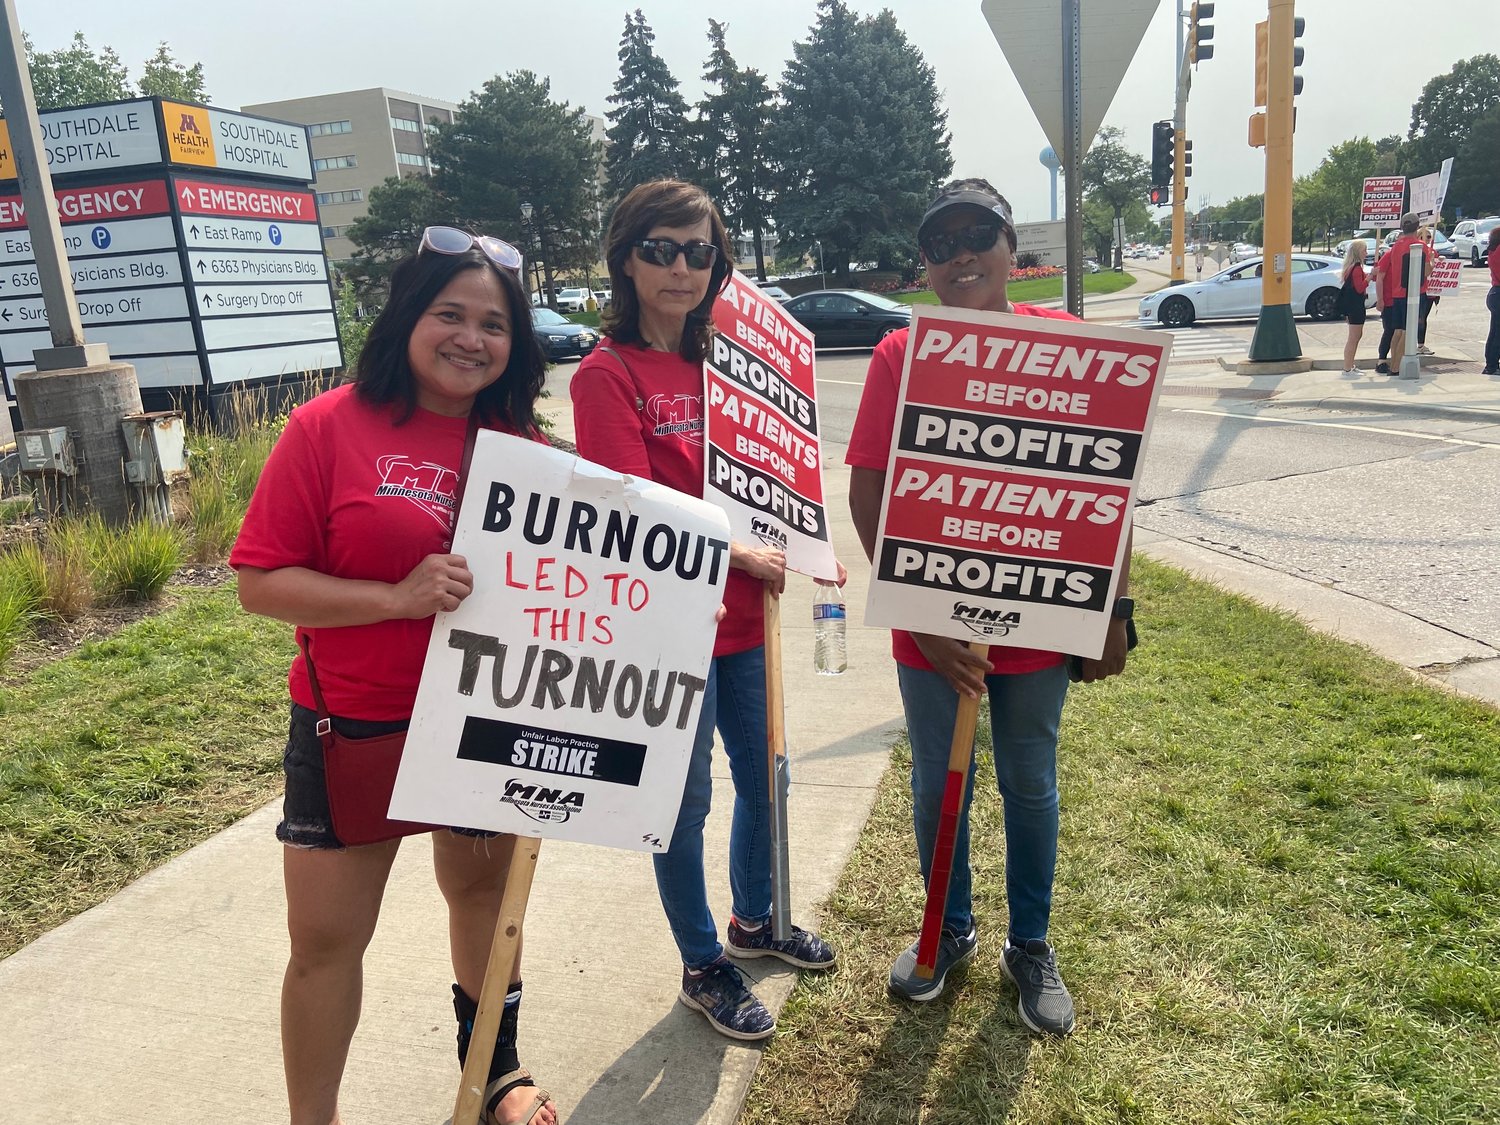 From left to right: Donna Soriano, Nellie Arsemyeva, and Diphina Sang gathered to strike in front of M Health Fairview Hospital Southdale, 6401 France Ave S, Edina on Sept. 14th, 2022. "We do not have appropriate staffing," Arsemyeva said. "We are expected to work doubles and may have 6 to 8 patients to care for at one time."